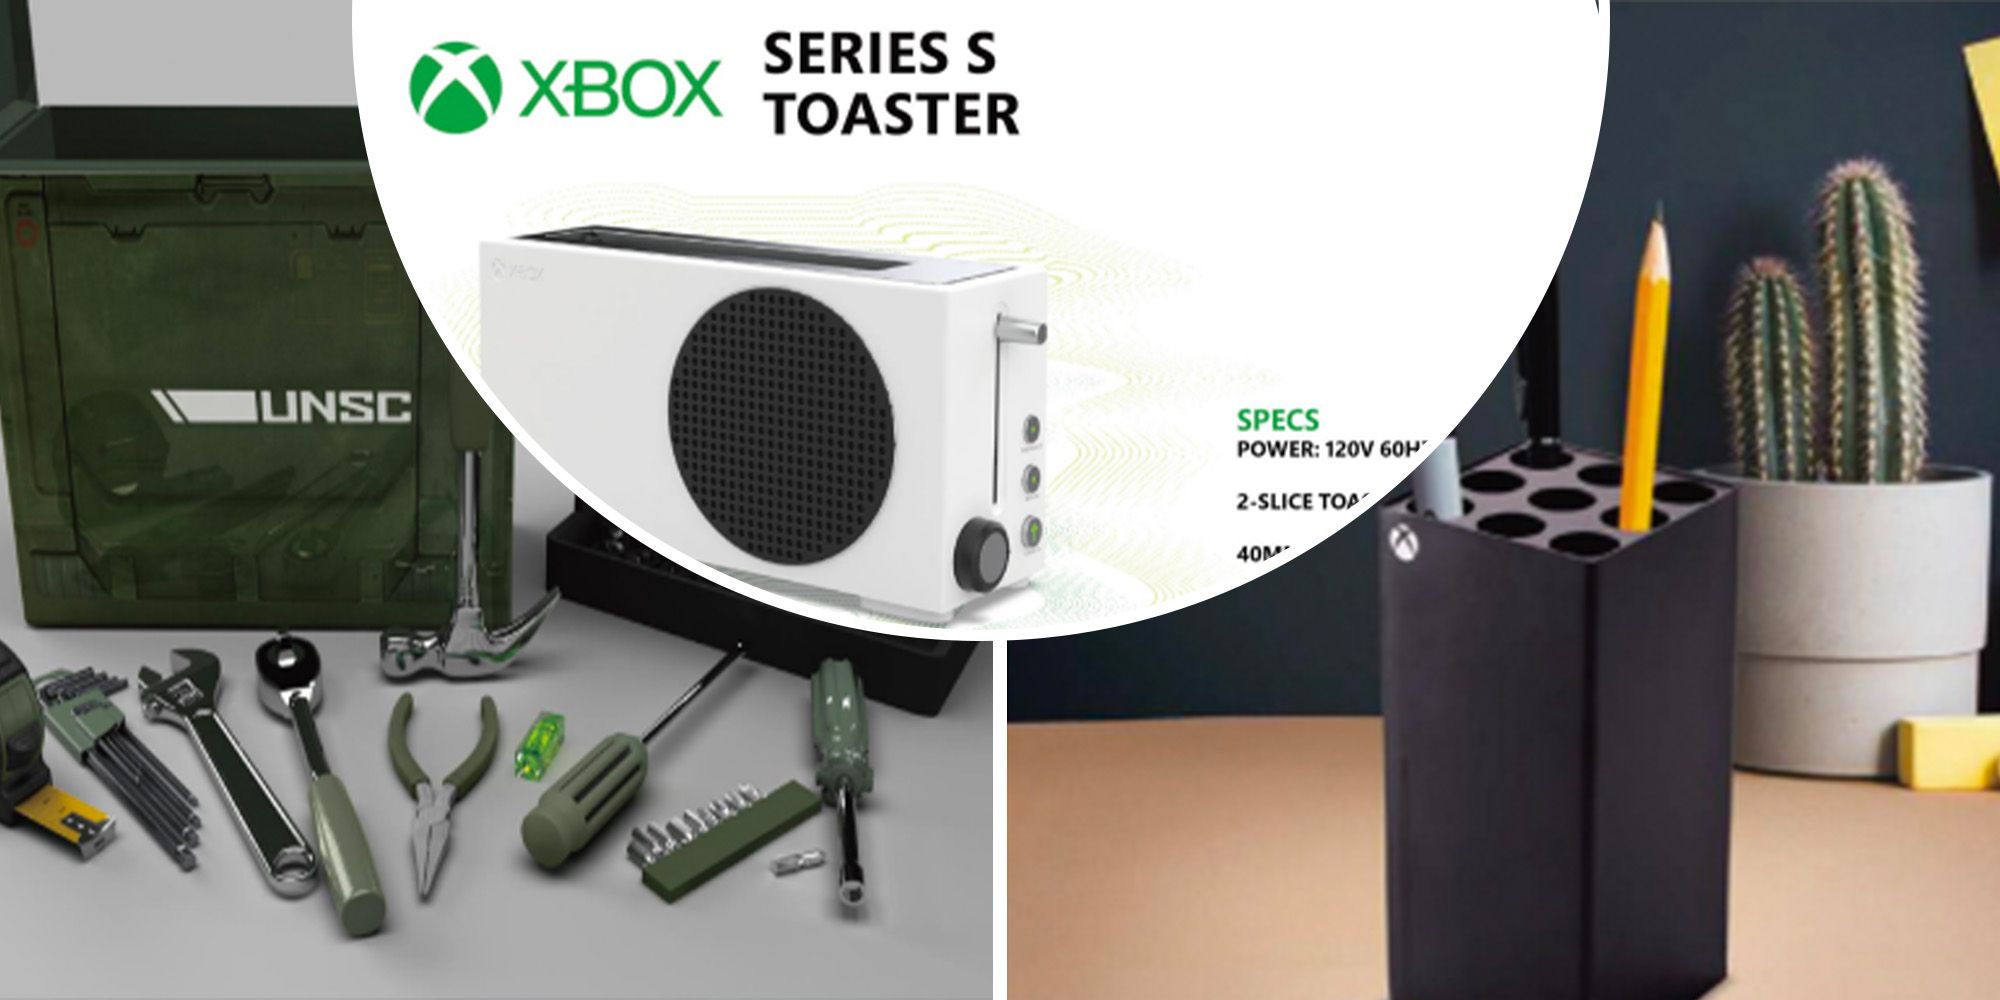 Xbox Series S Toaster Halo Toolbox And Xbox Series X Pen Holder 